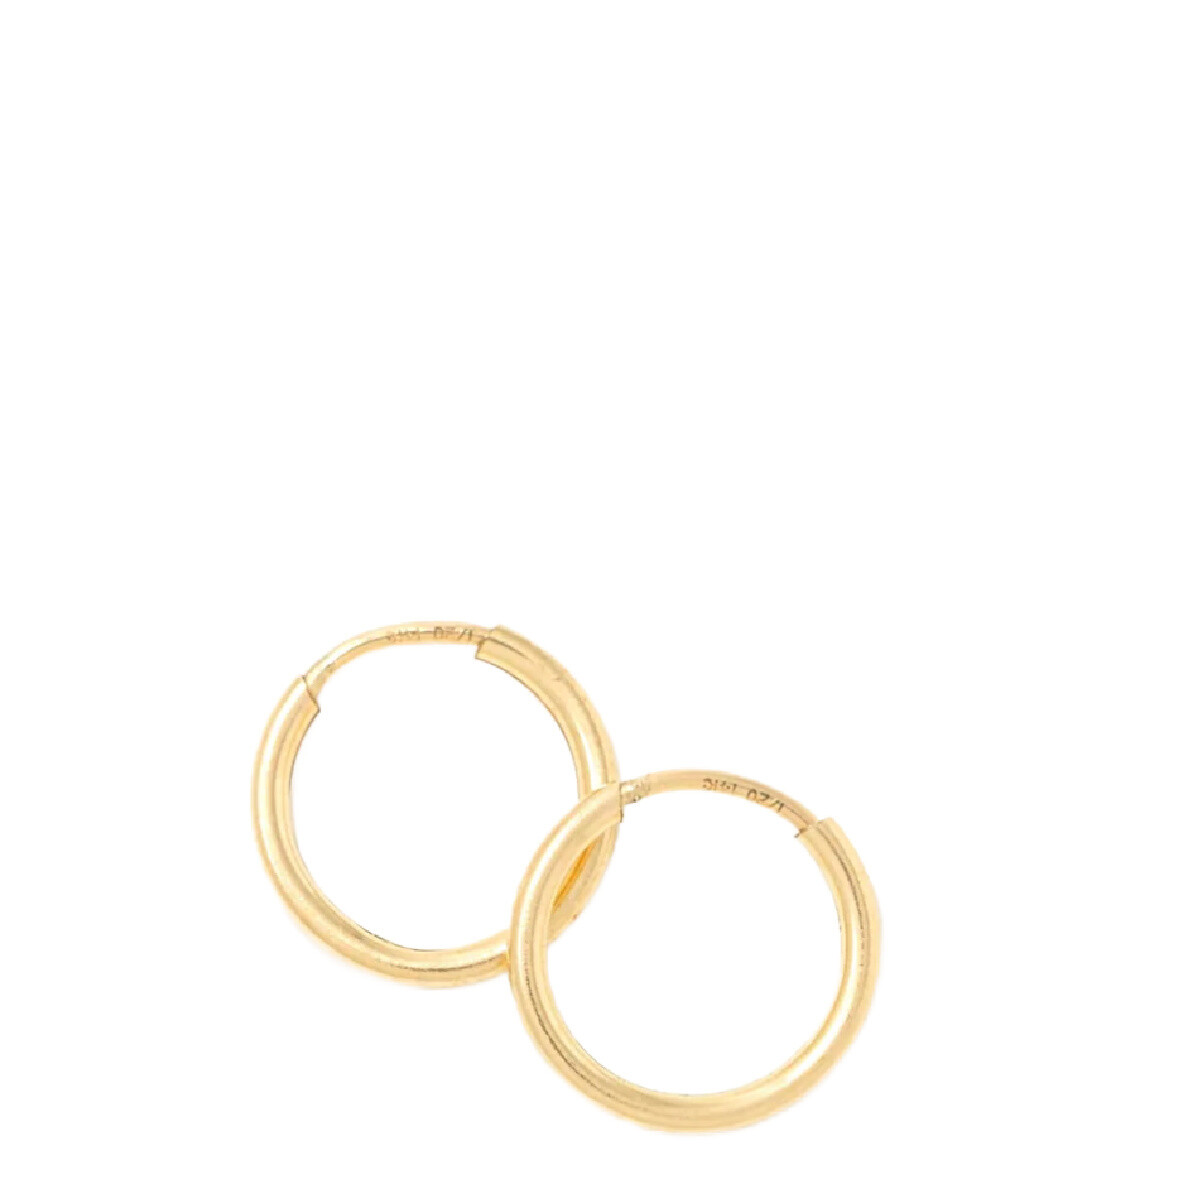 Lover's Tempo 14mm Gold-Filled Infinity Hoop Earrings